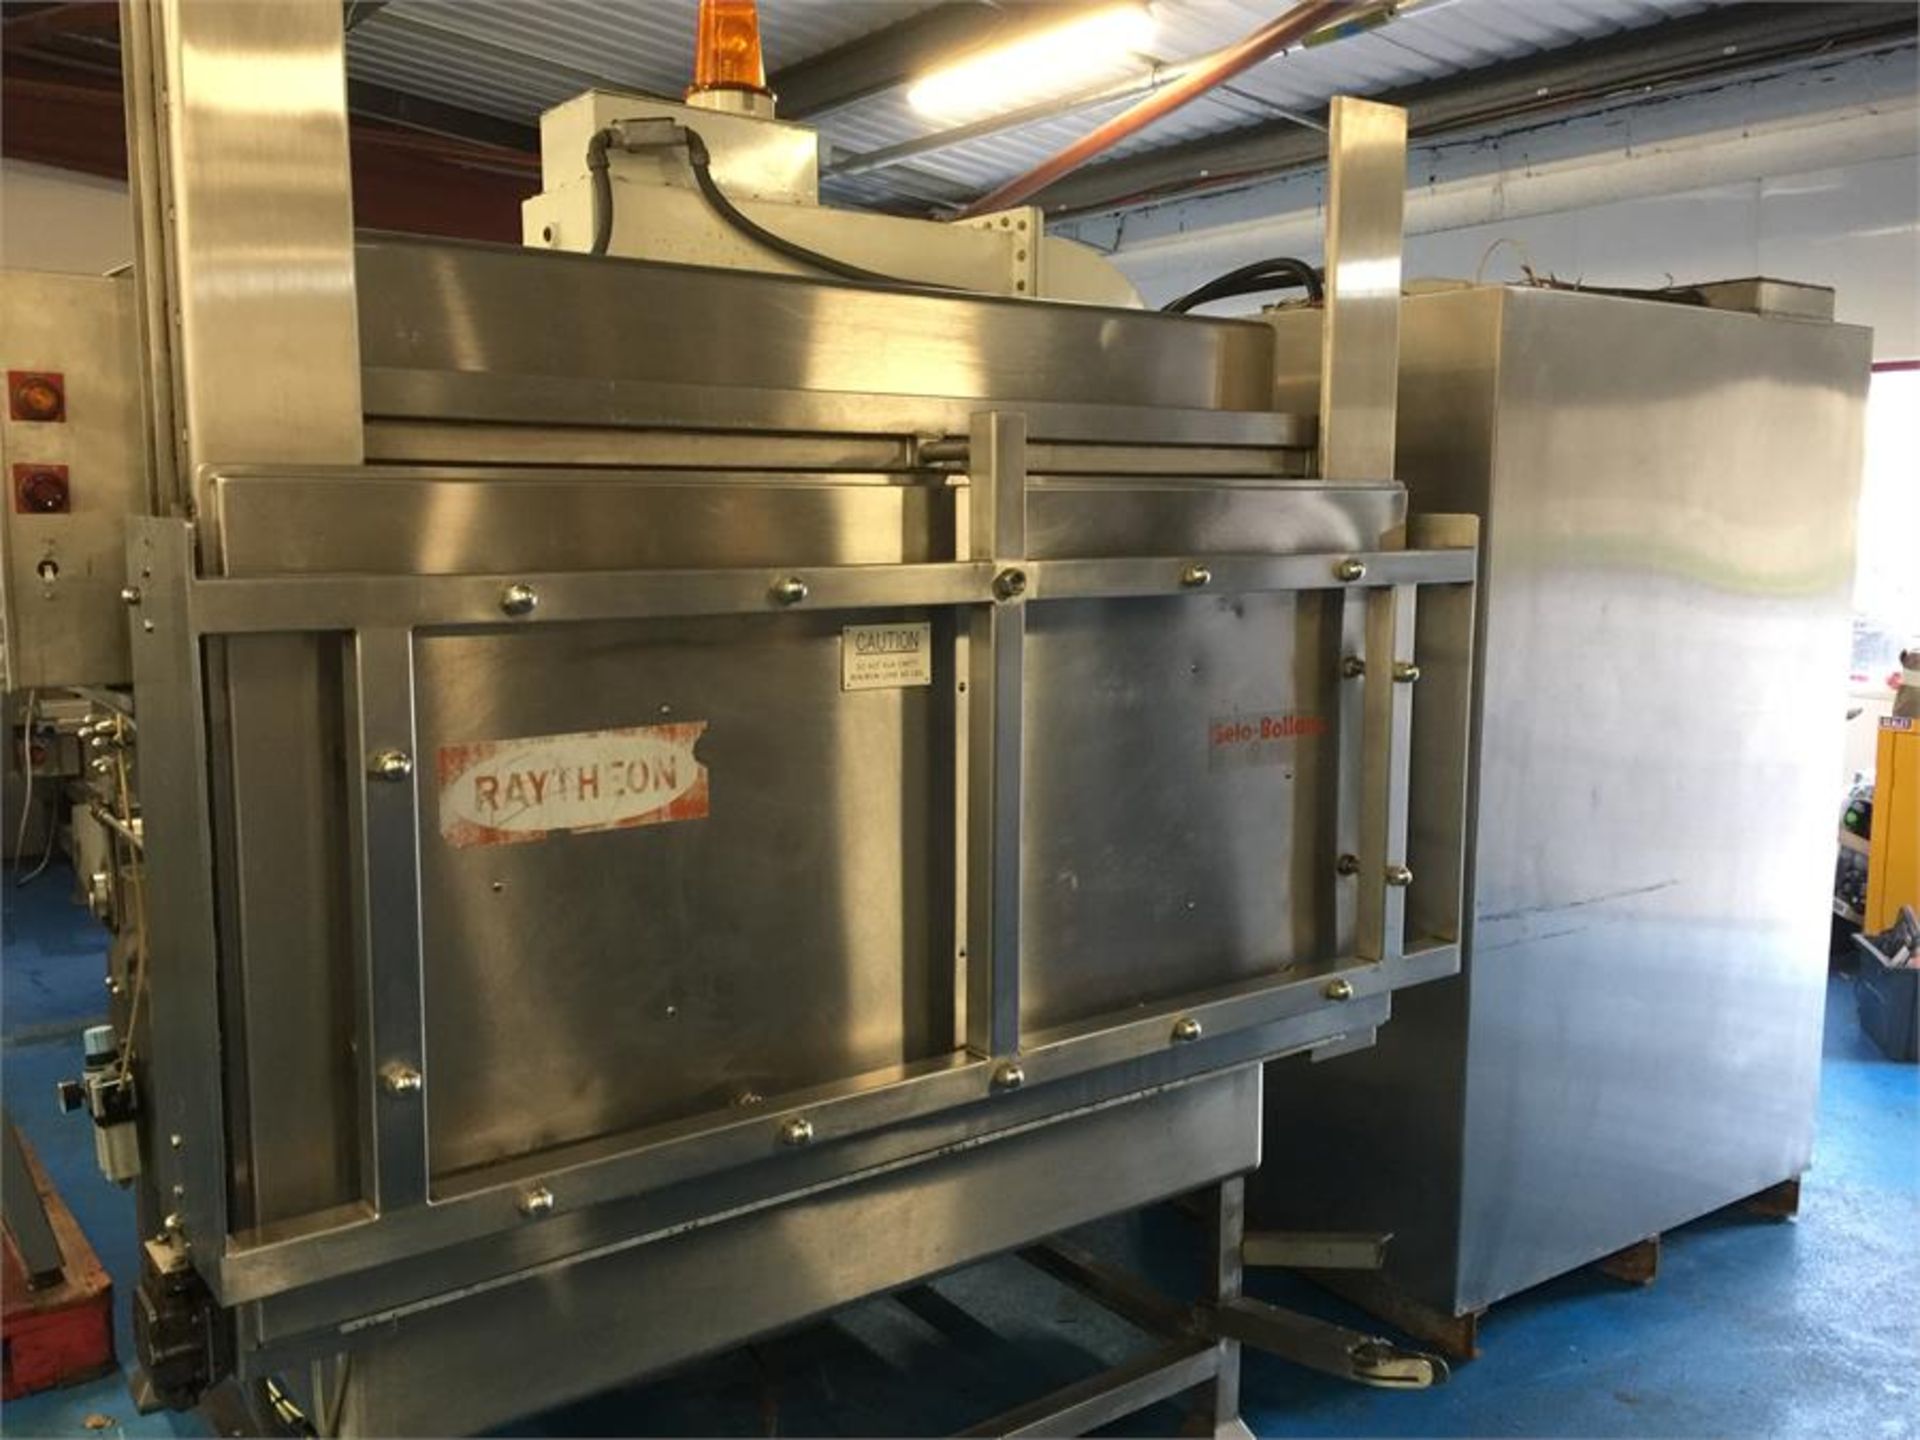 1 x Raytheon microwave oven. Previously used for defrosting boxes of meat prior to processing.